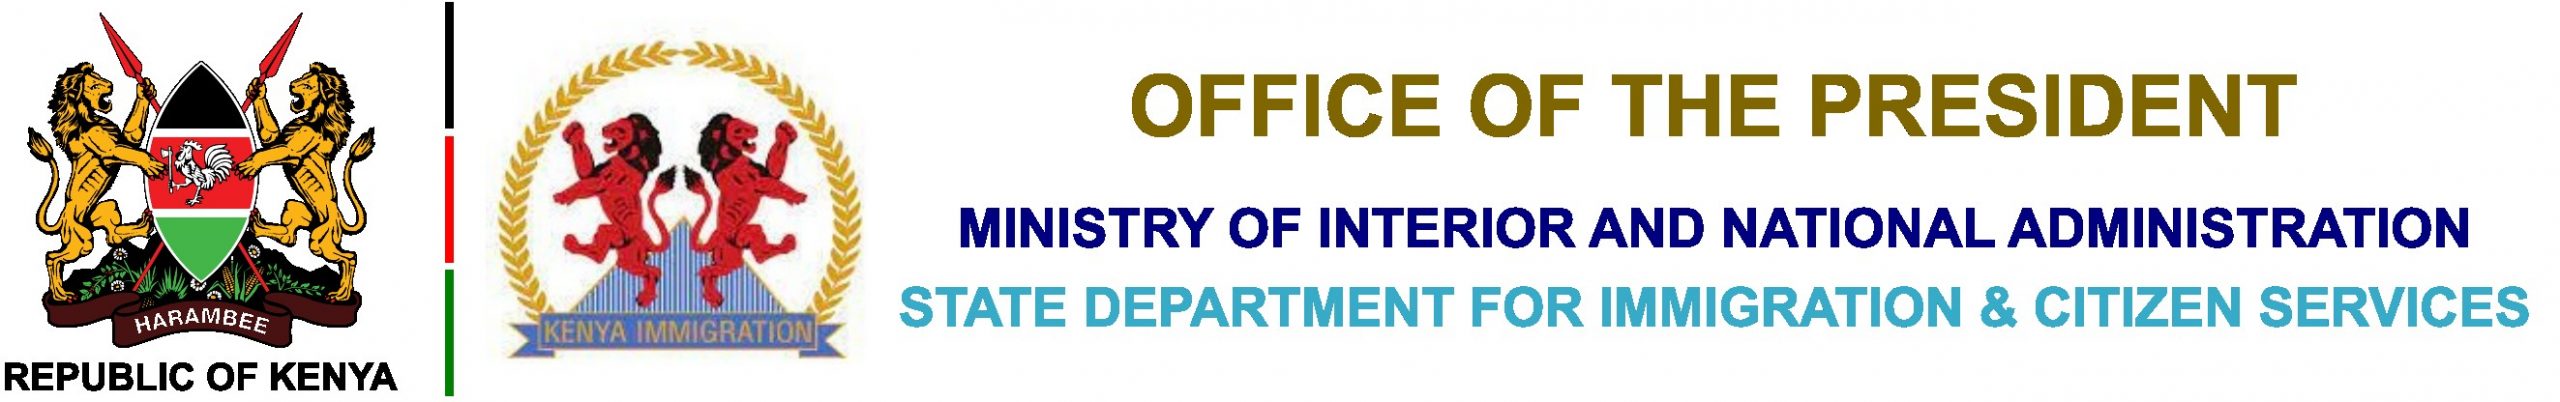 Directorate of Immigration Services